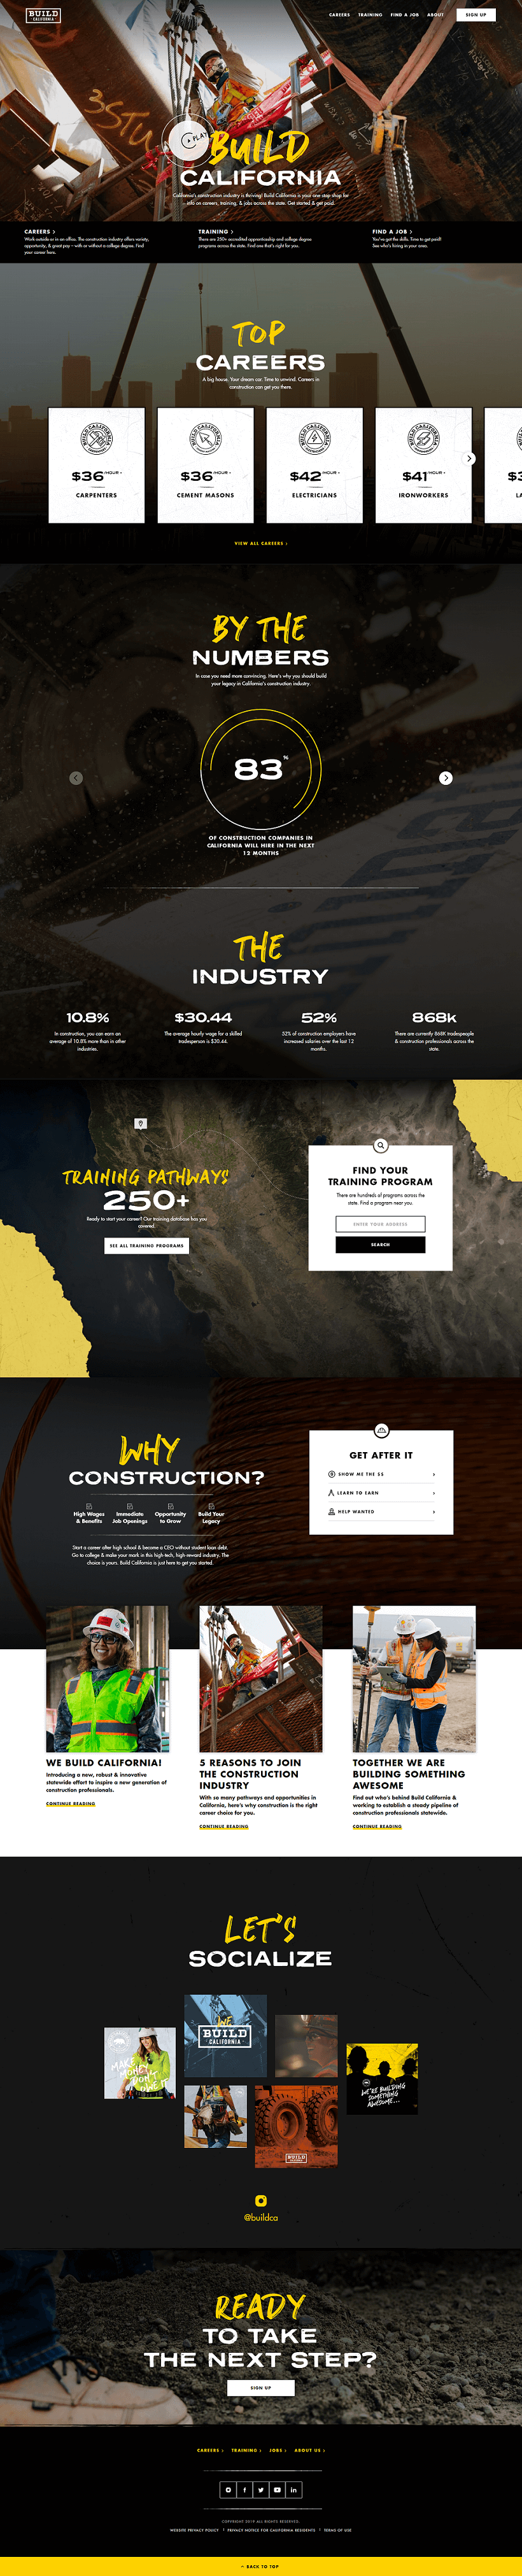 Build California site home page